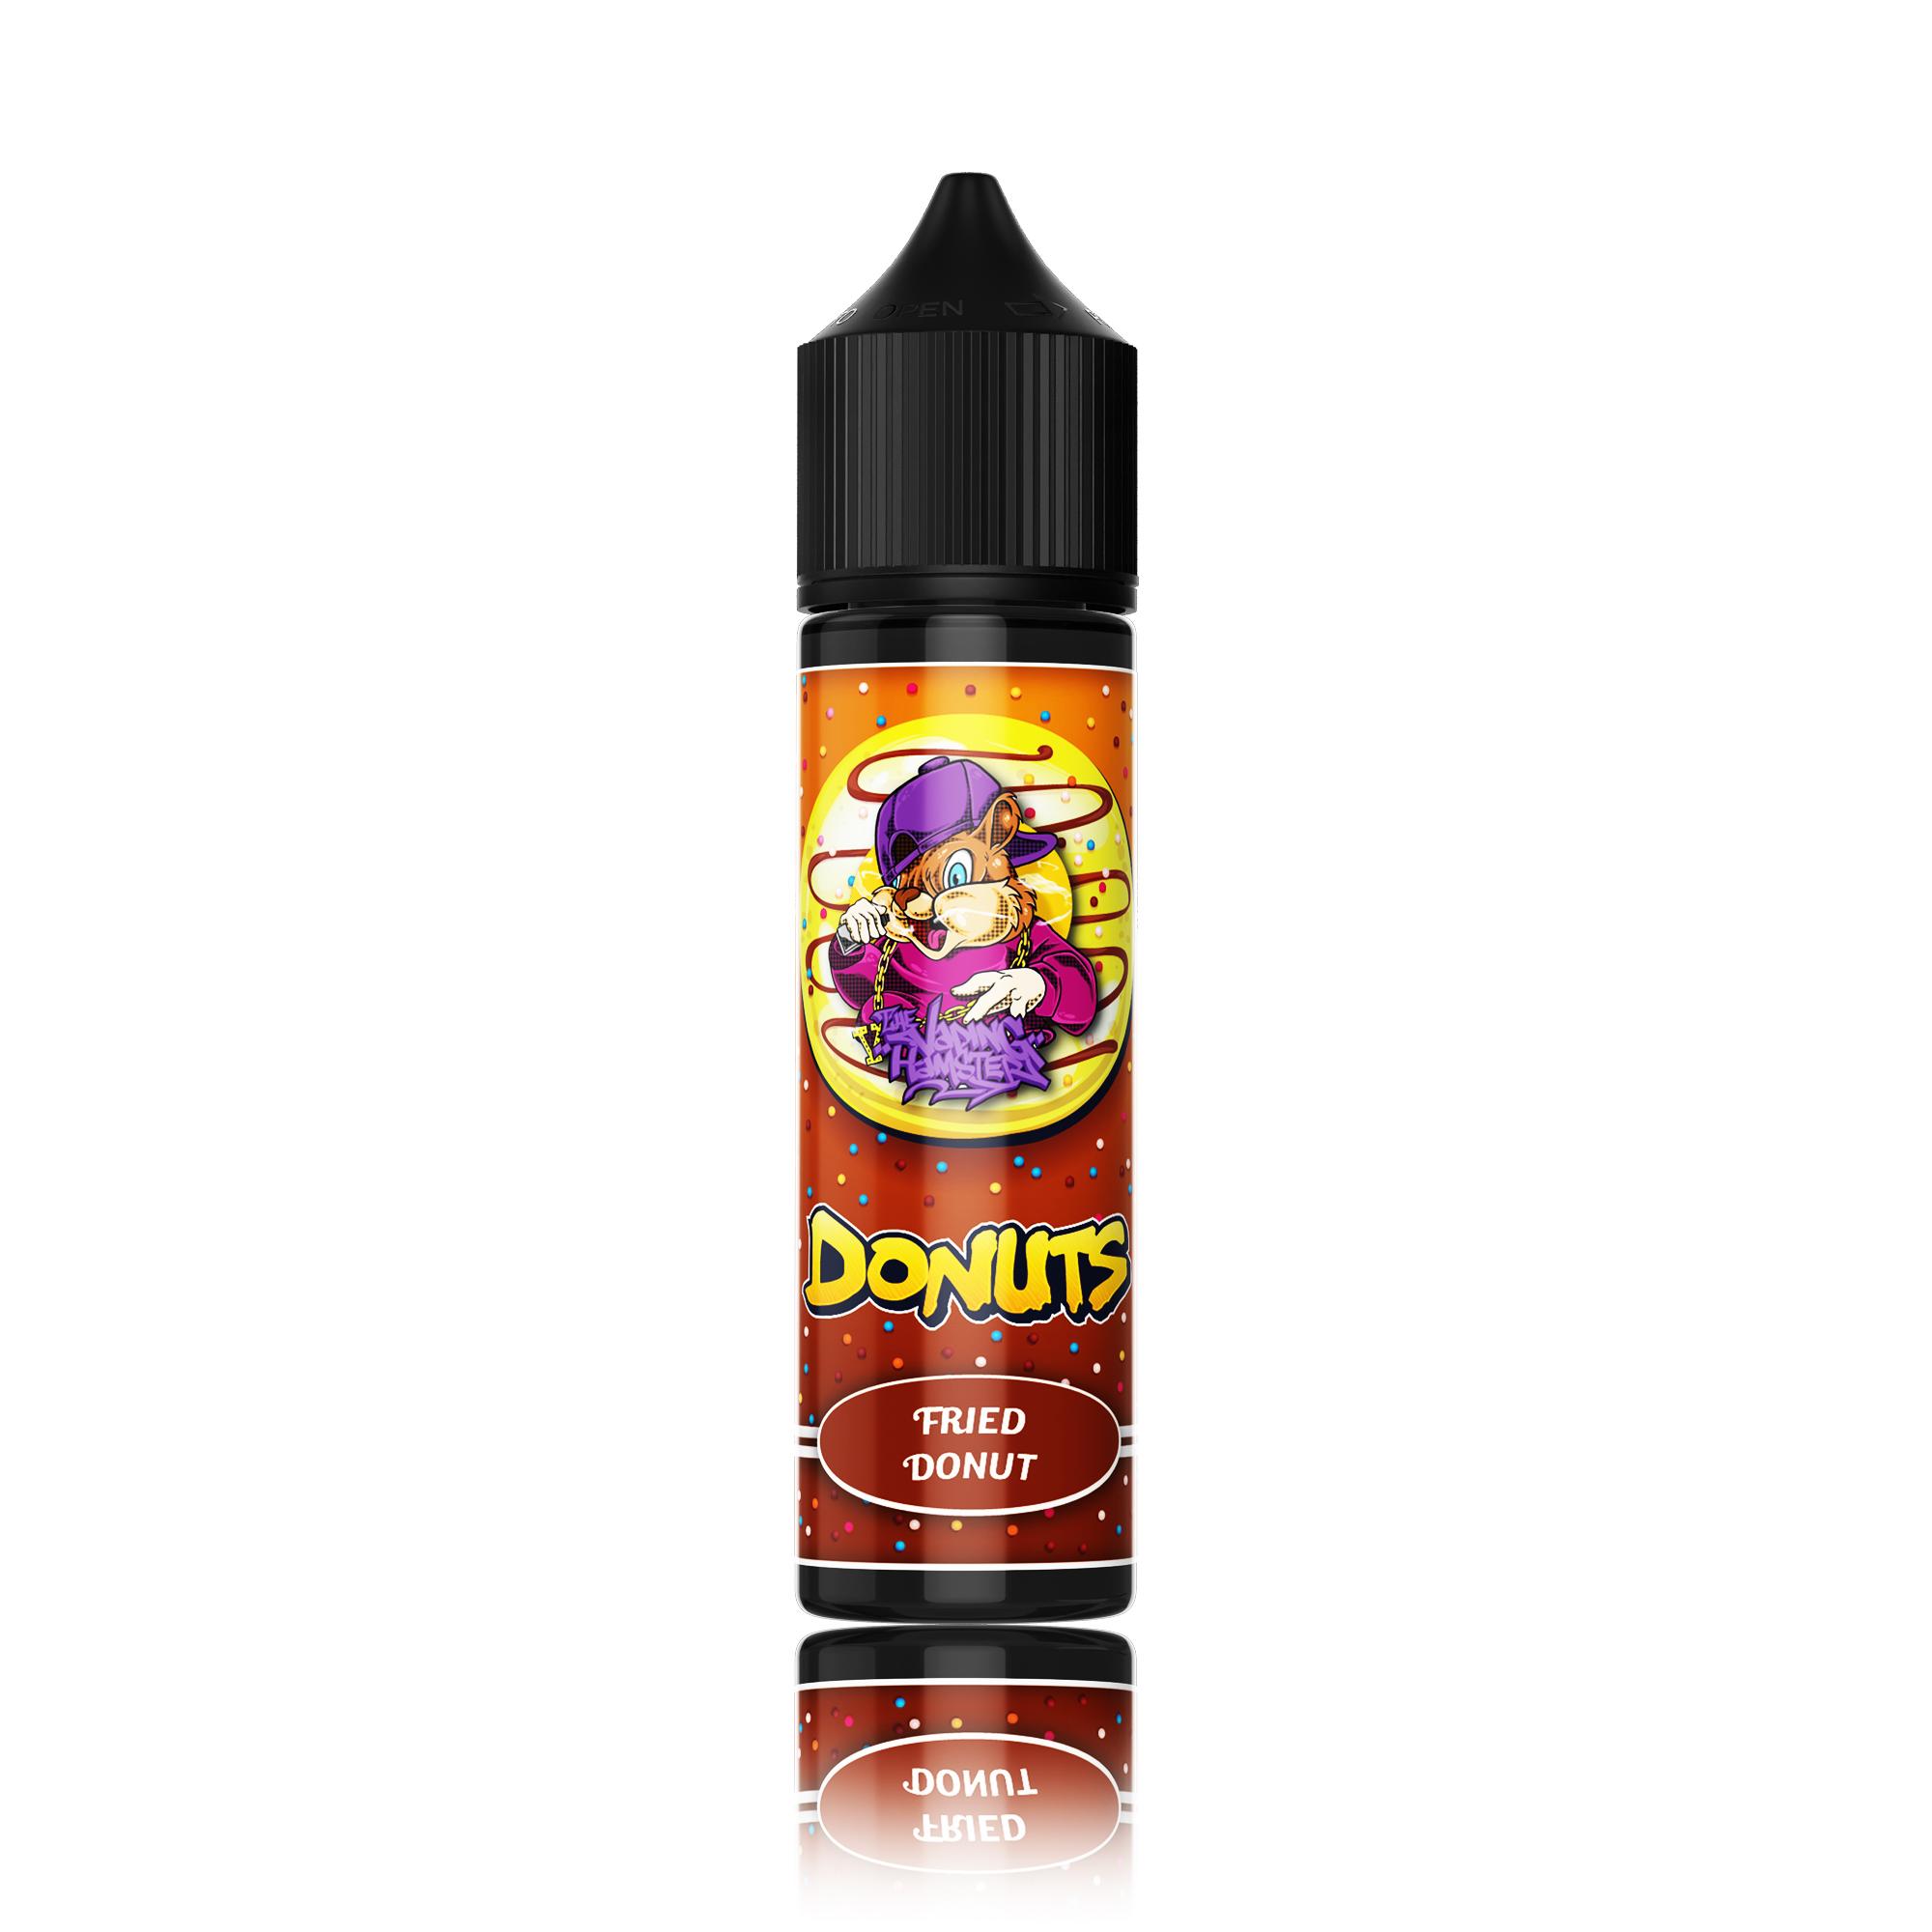 Fried Donut by The Vaping Hamster